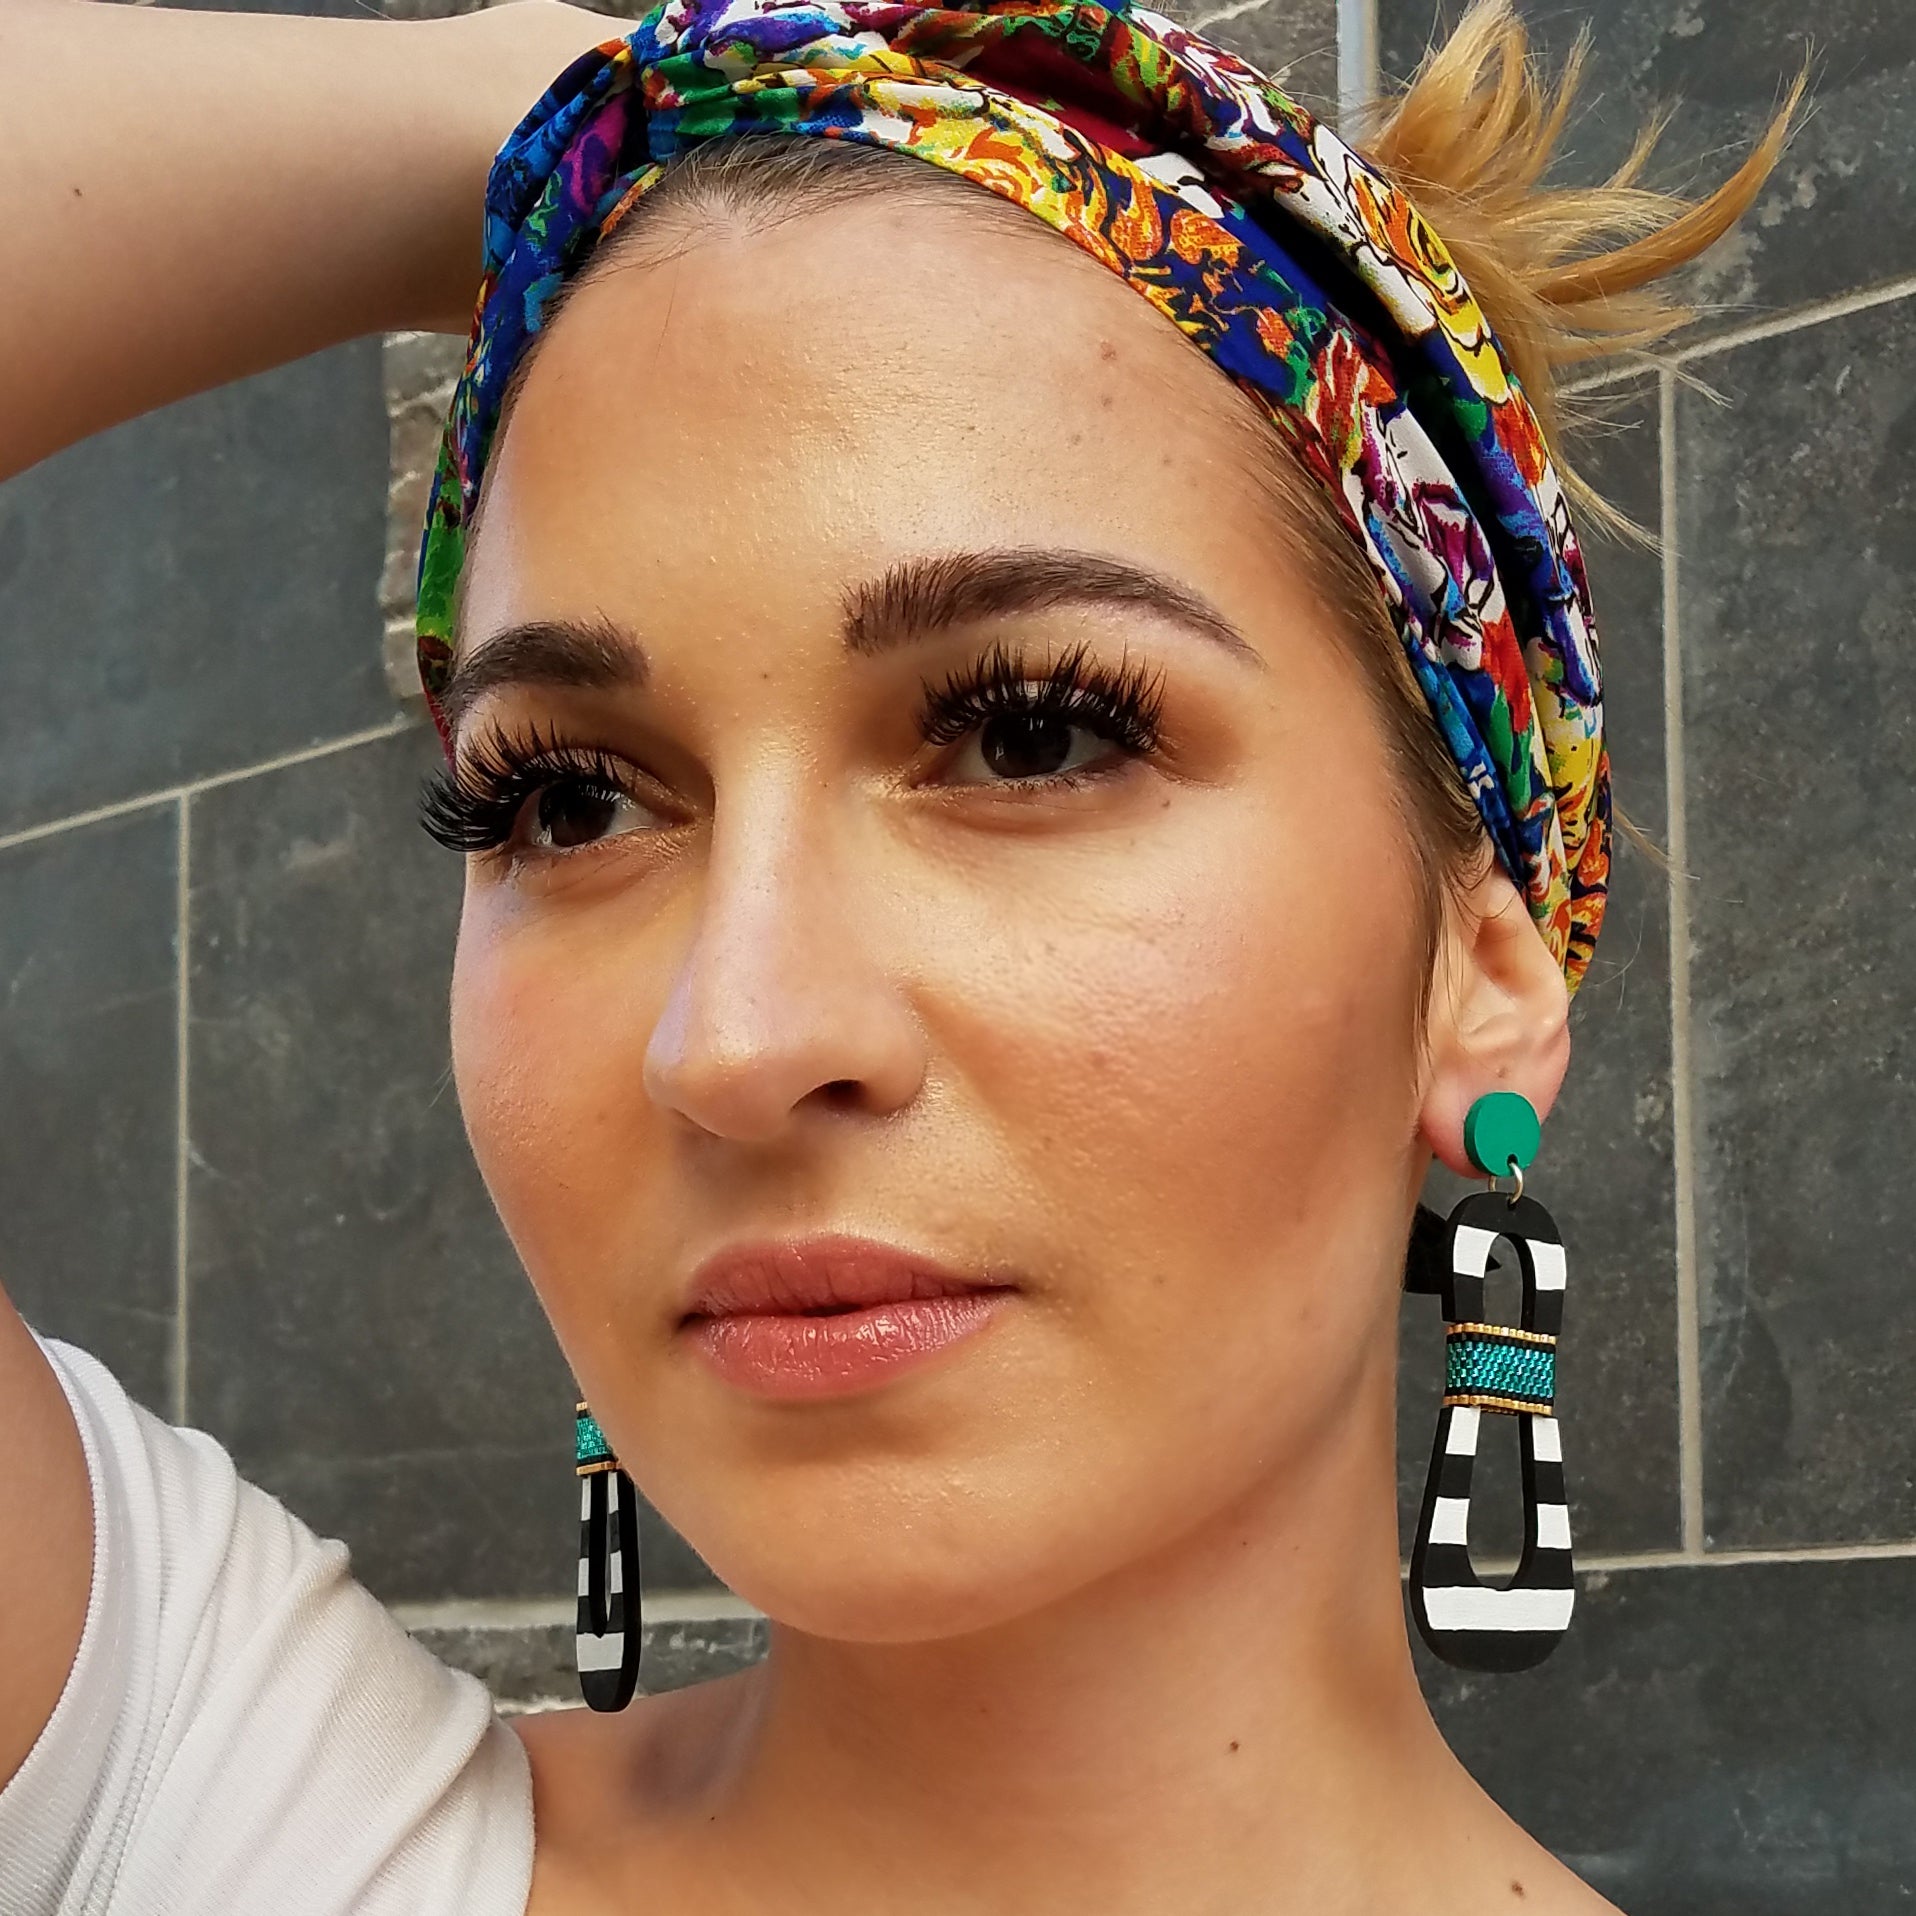 Model with colorful headband wearing modern, curvy, black and white striped statement earrings with hand-beaded teal accents by the brand SCOTCHBONNET.